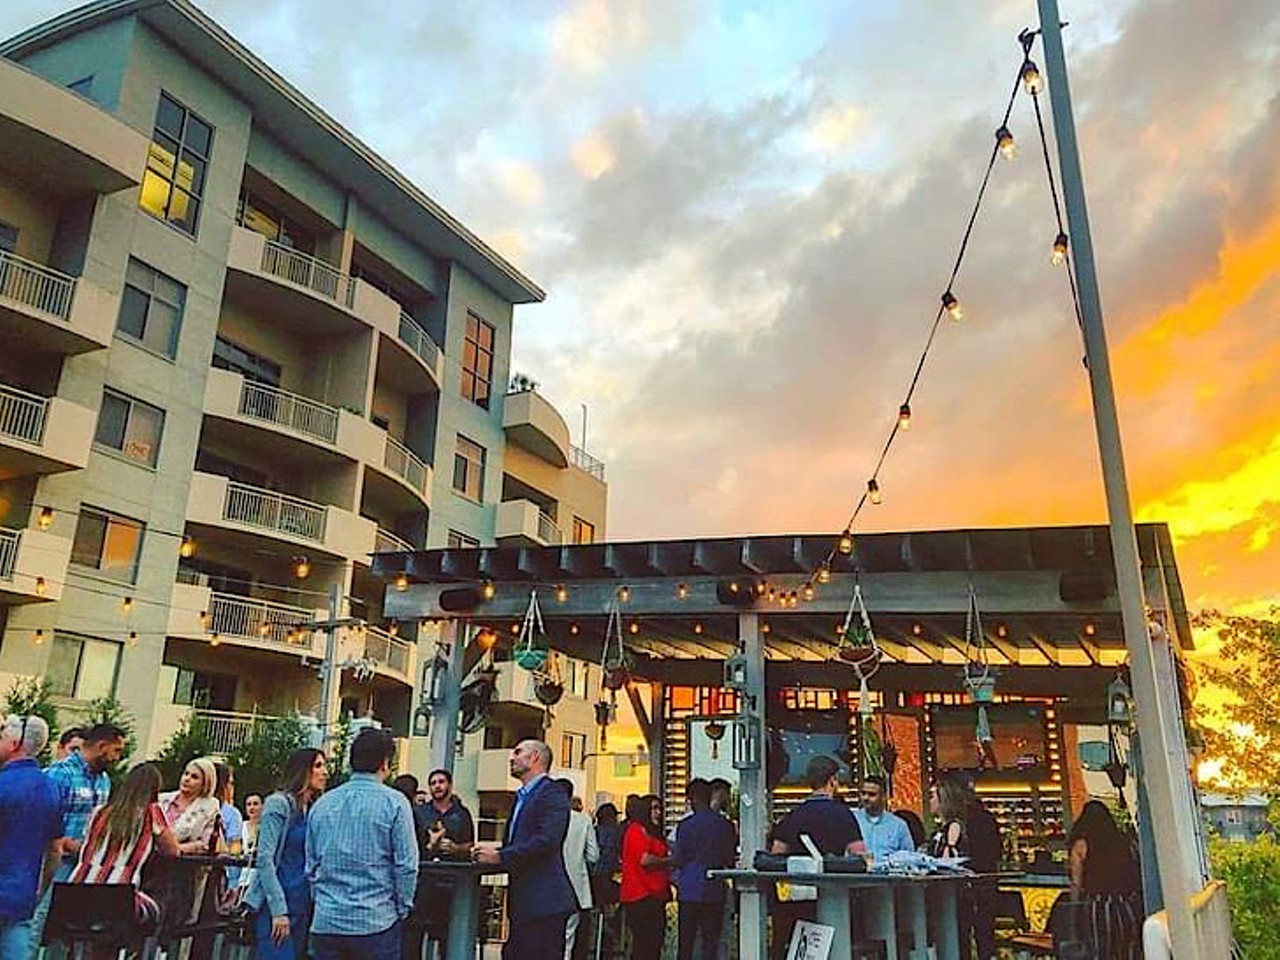 Mole Y Abuela
1202 N Franklin St, Tampa, FL
Offering up some of the best views of downtown Tampa, this rooftop bar is a local favorite. You can go up there and, as Ab-Soul once said, &#147;kill a bottle of tequila.&#148;
Photo via Mole Y Abuela/Facebook